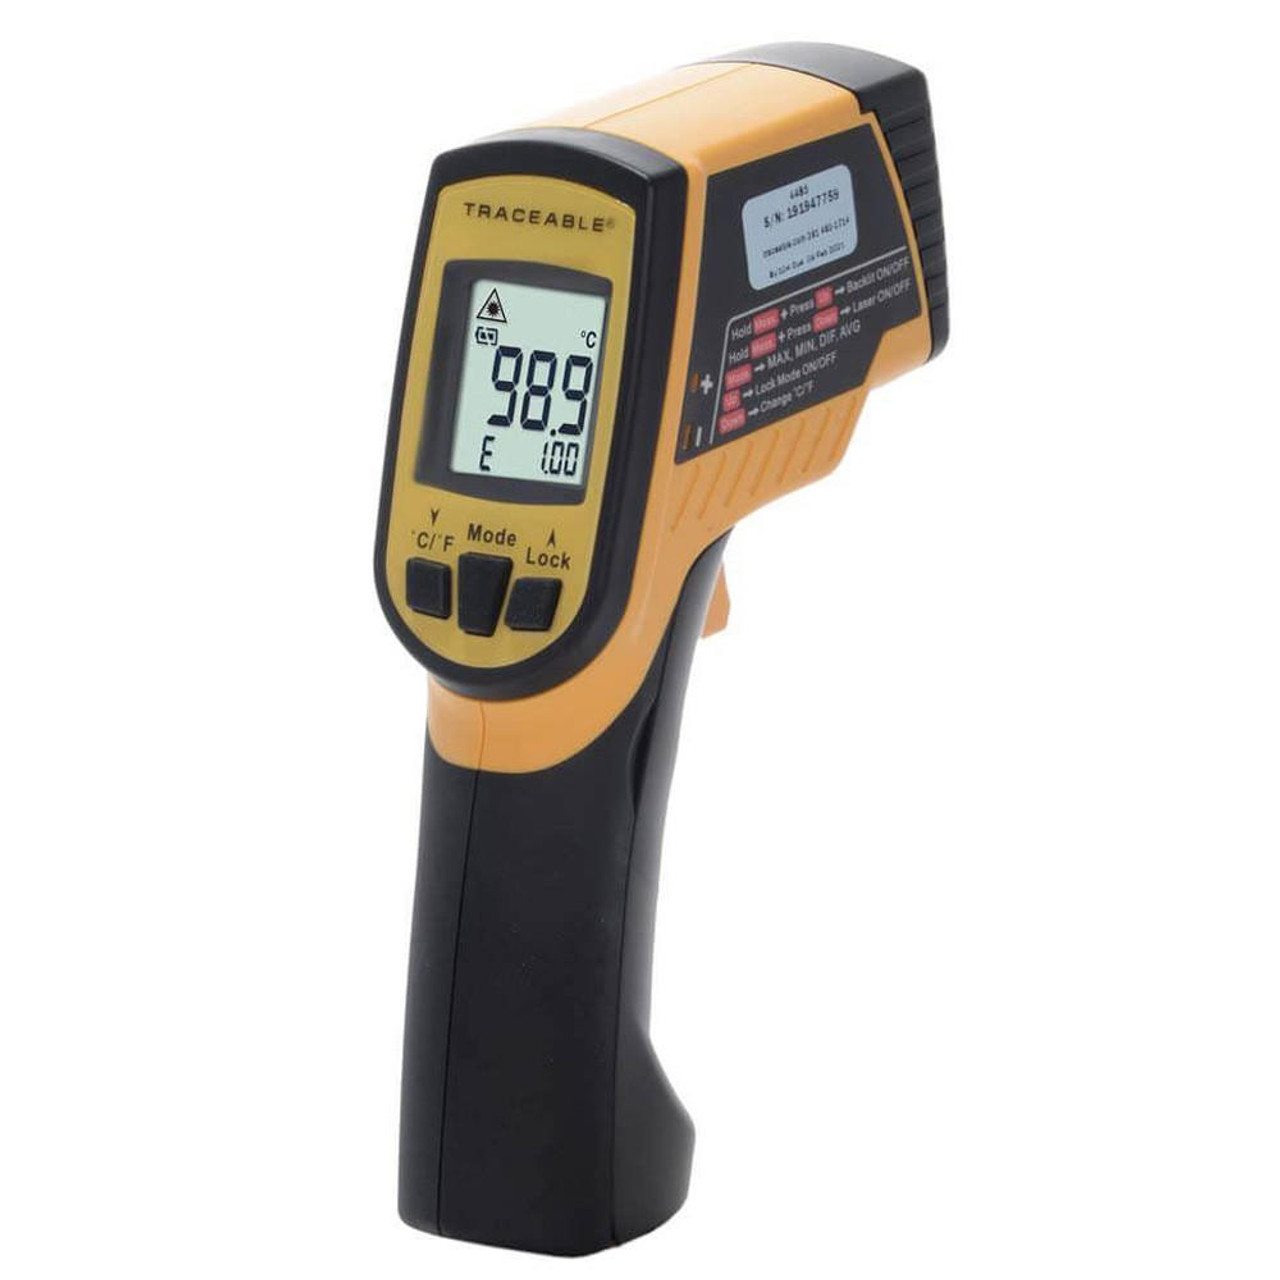 https://cdn11.bigcommerce.com/s-zgzol/images/stencil/1280x1280/products/12601/236708/gilson-company-traceable-infrared-dual-laser-thermometer-76-to-1022f-60-to-550c__37690.1697824708.jpg?c=2